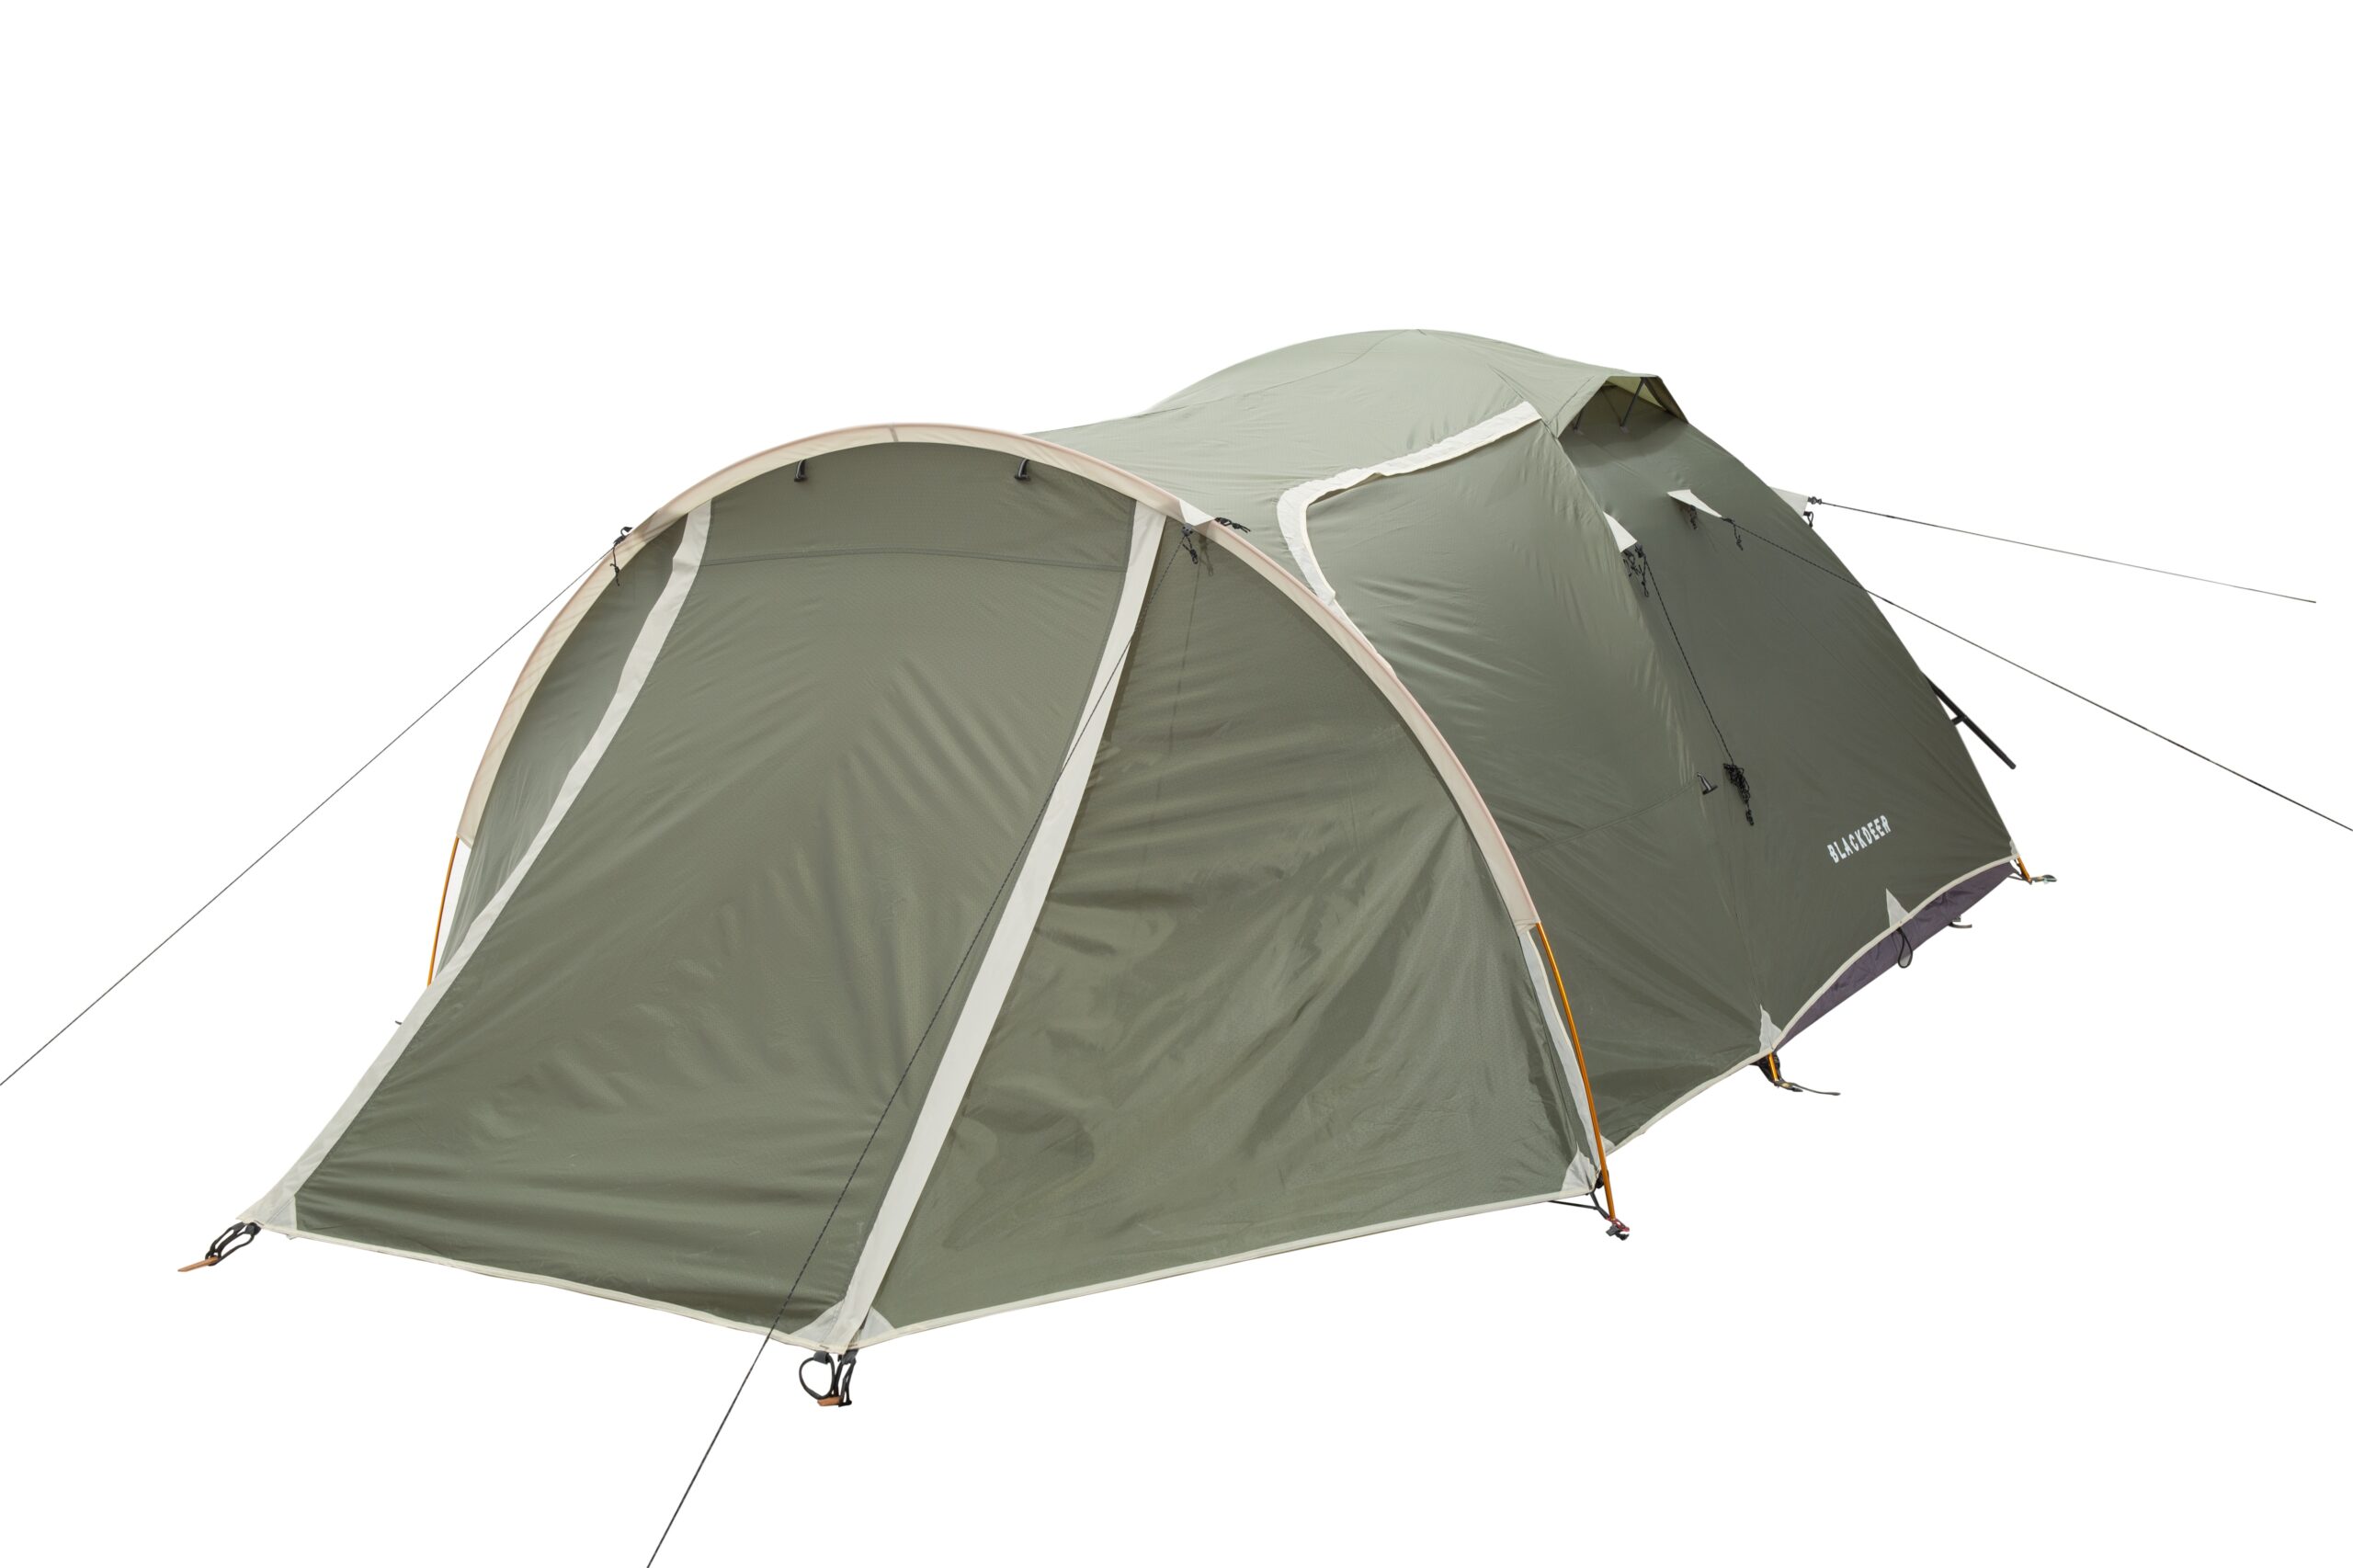 Blackdeer Expedition Camping Tent One Bedroom & One Living Room For 3-4 people 150D Oxford PU3000 mm Hiking Trekking Tent